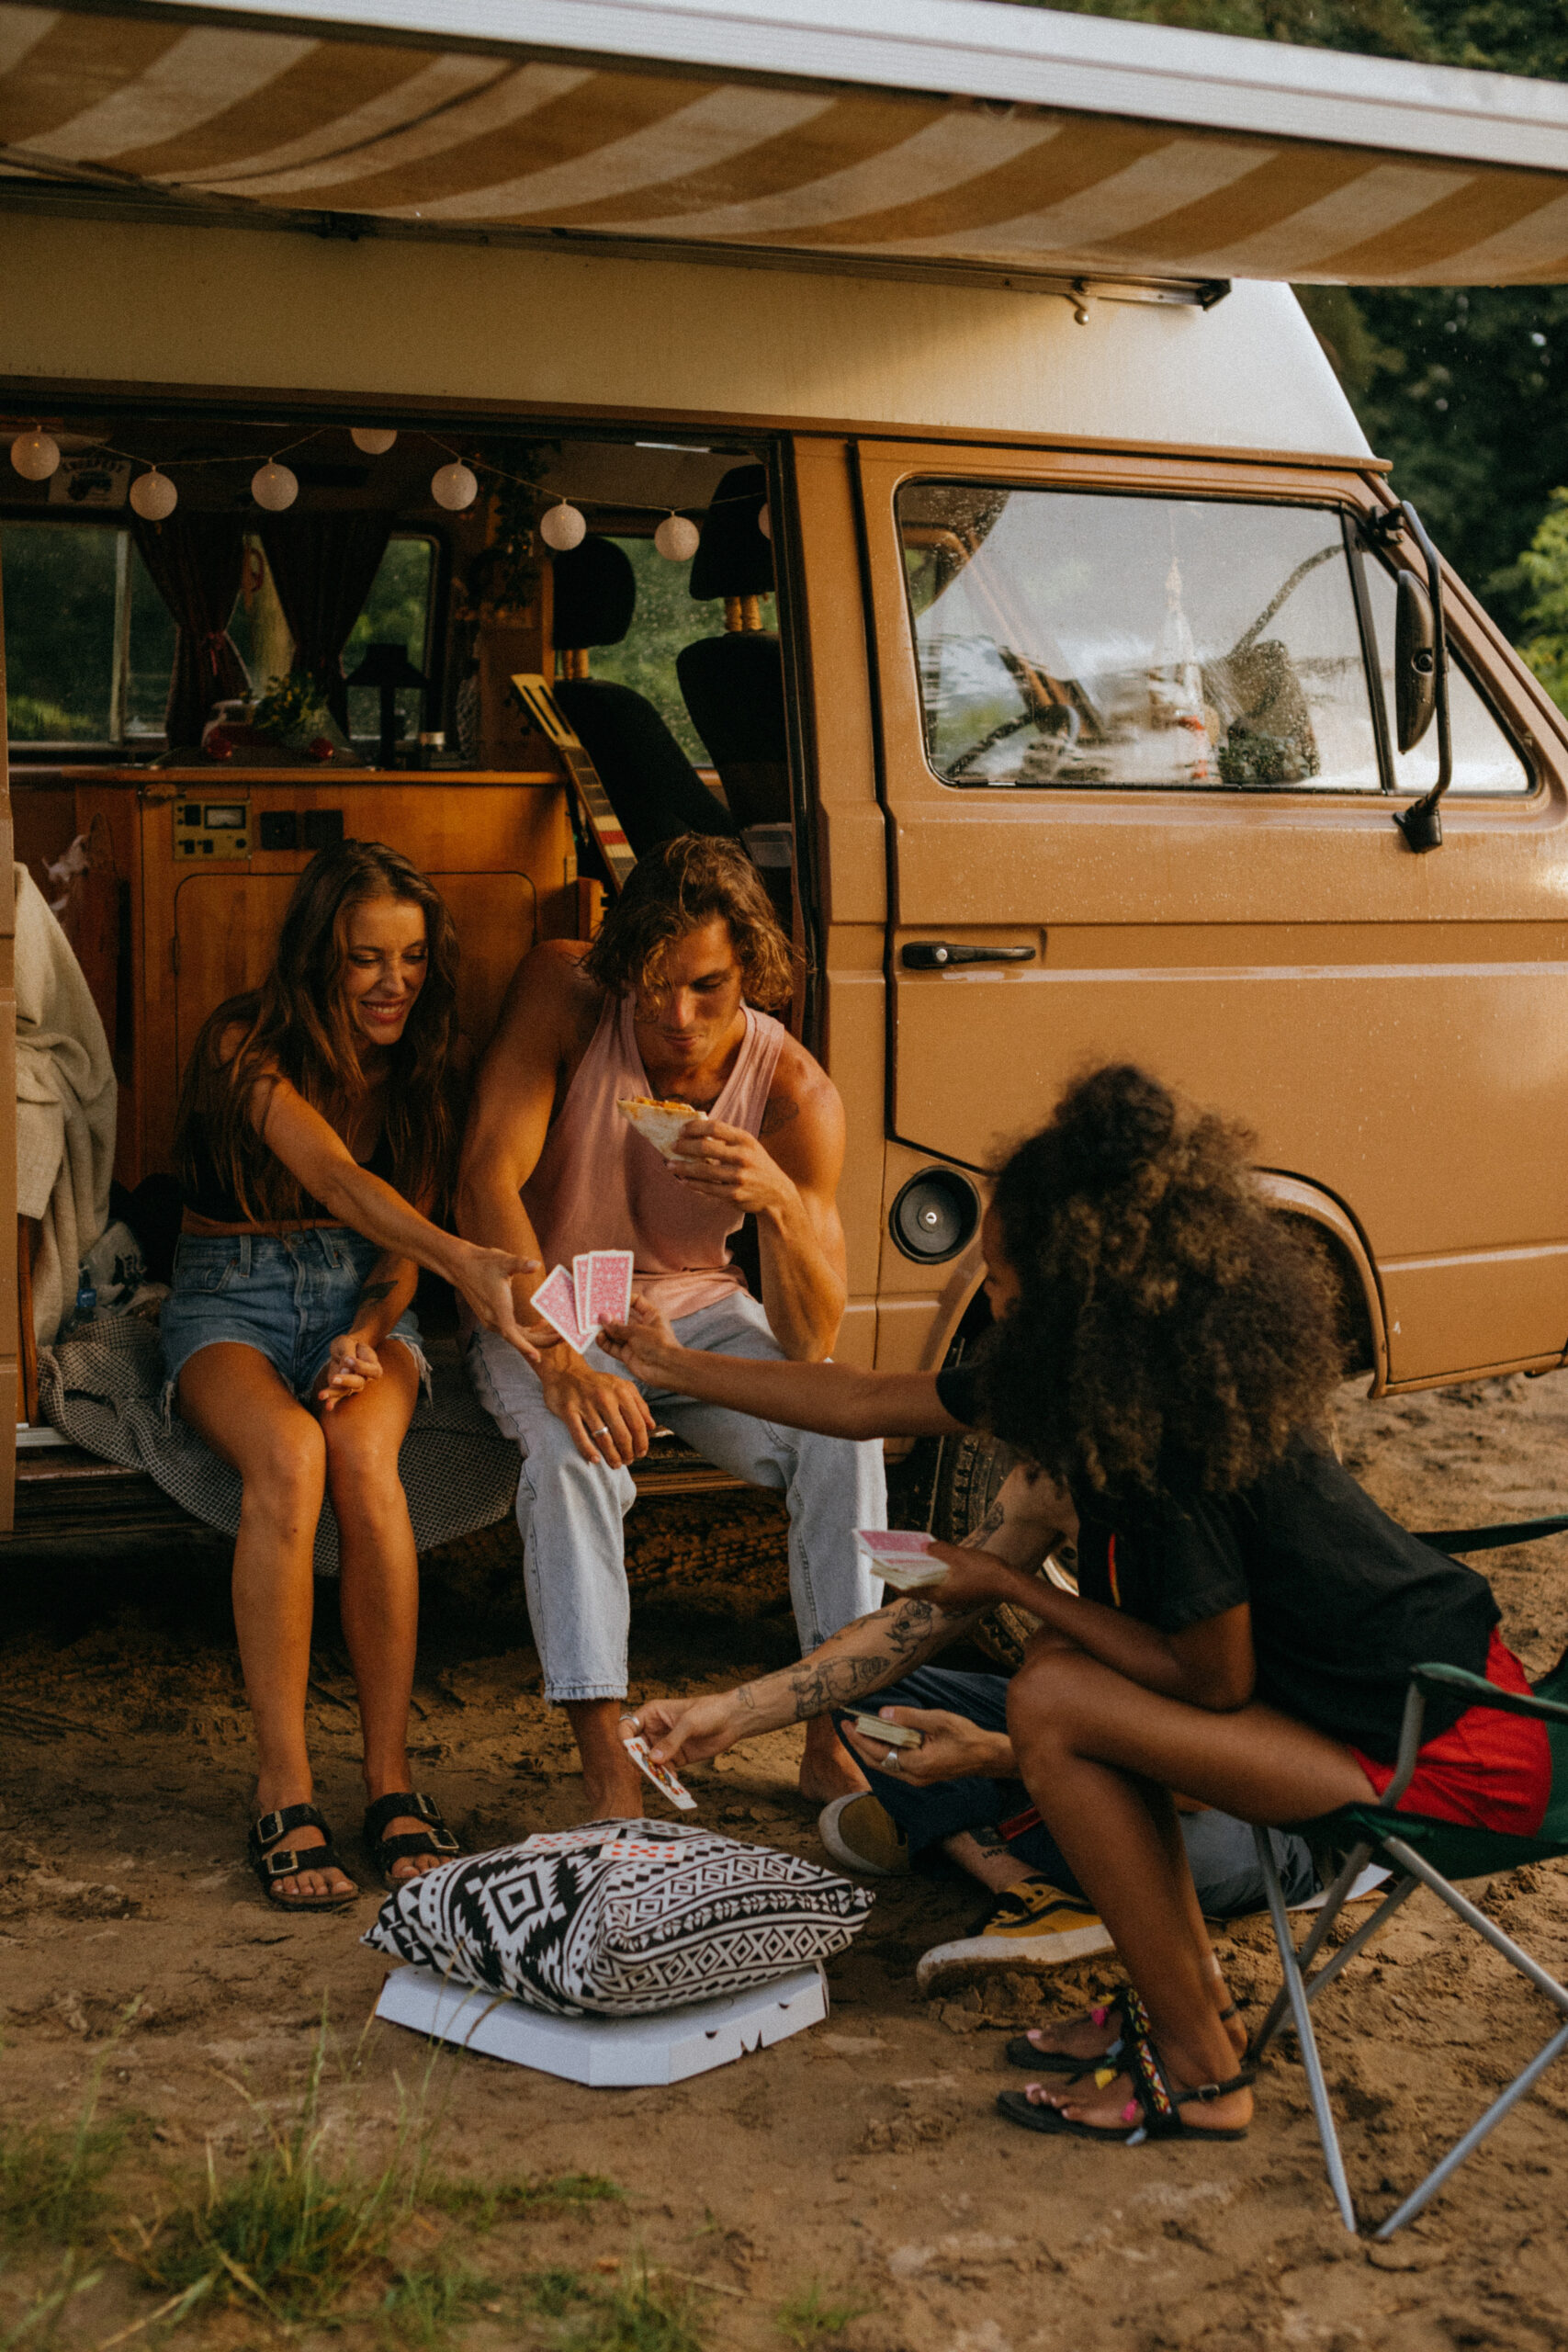 Young people outside a camper van